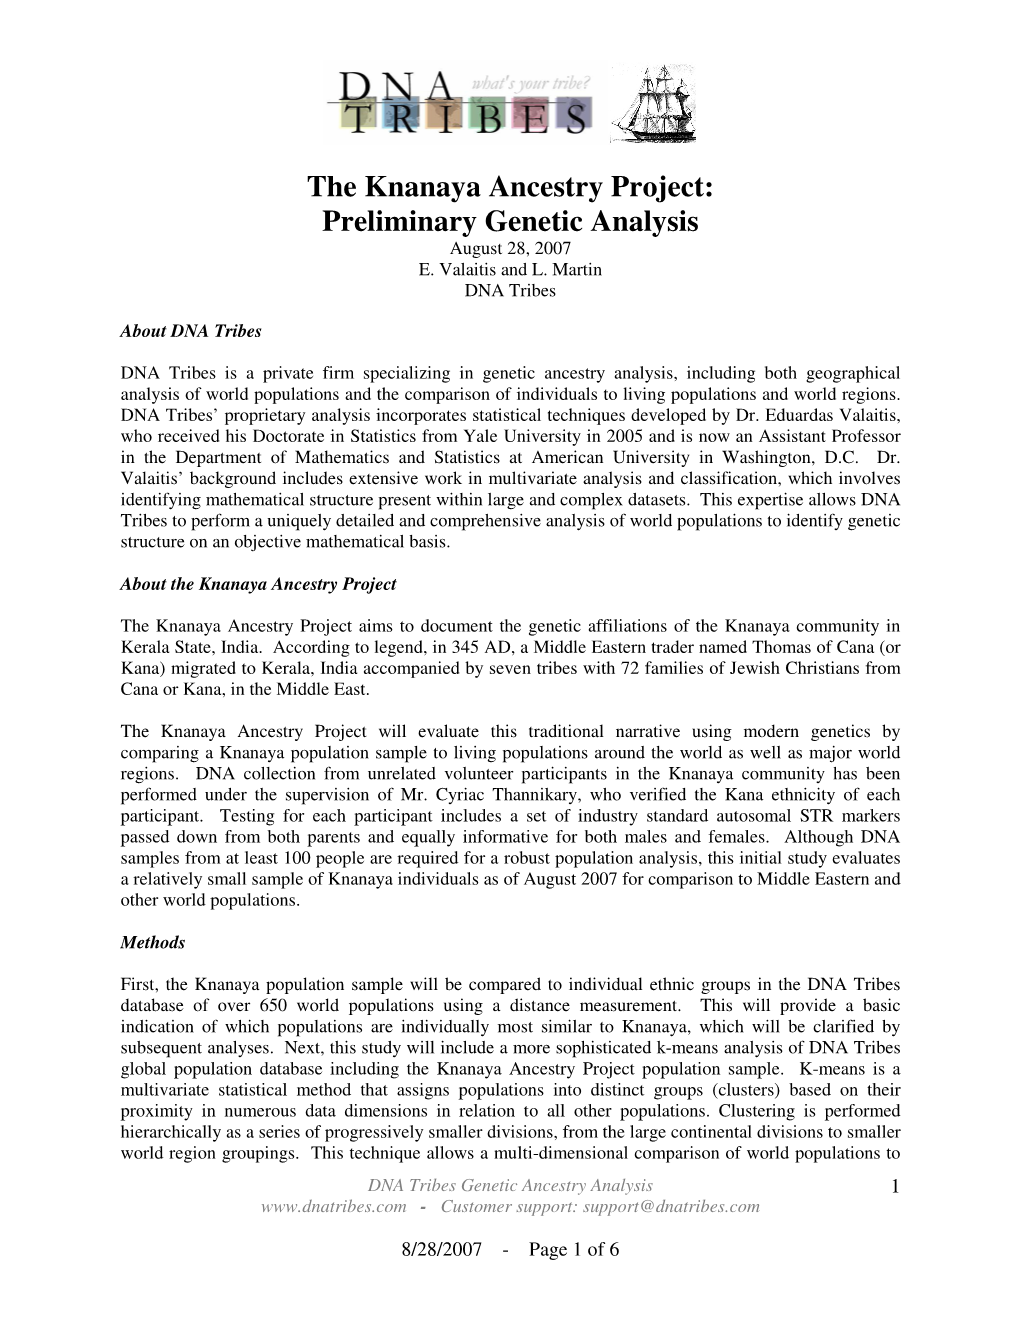 The Knanaya Ancestry Project: Preliminary Genetic Analysis August 28, 2007 E